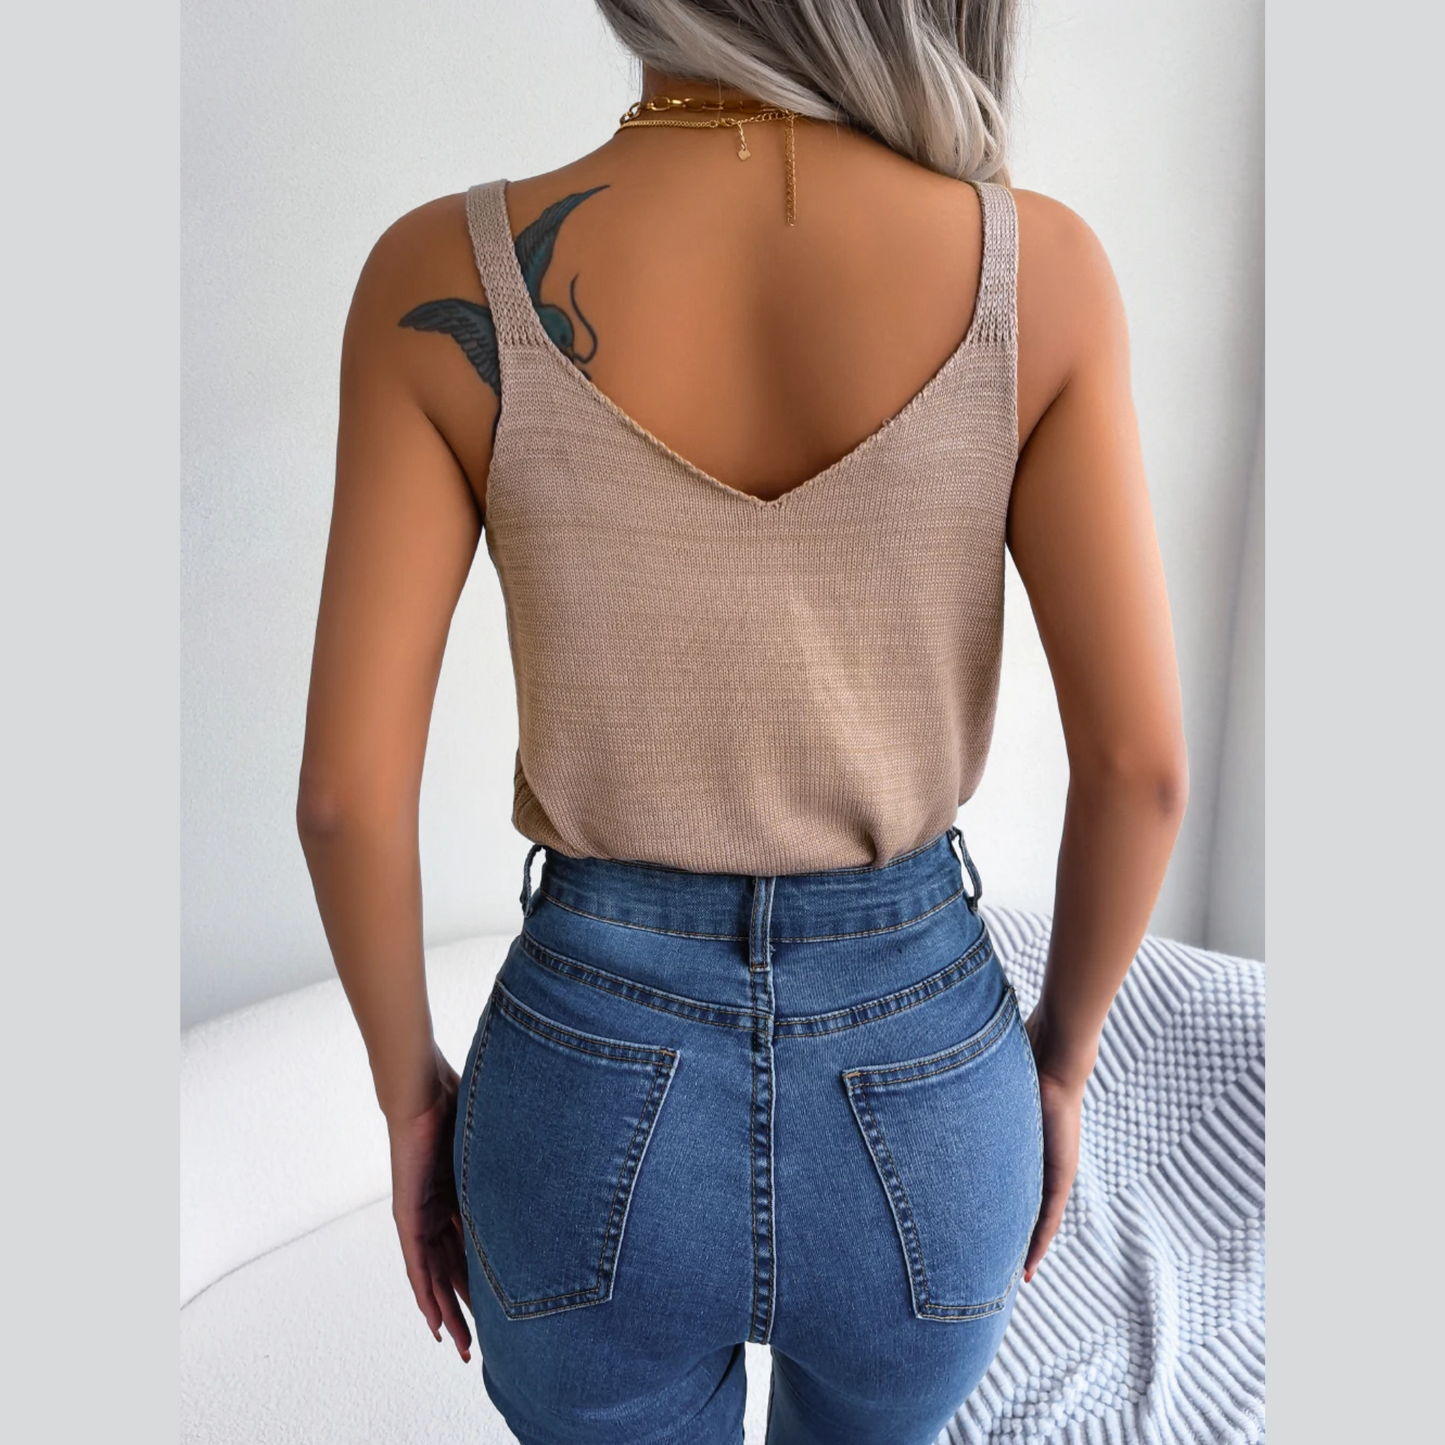 Cindy - Beige Knitted Scoop Neck Tank Top